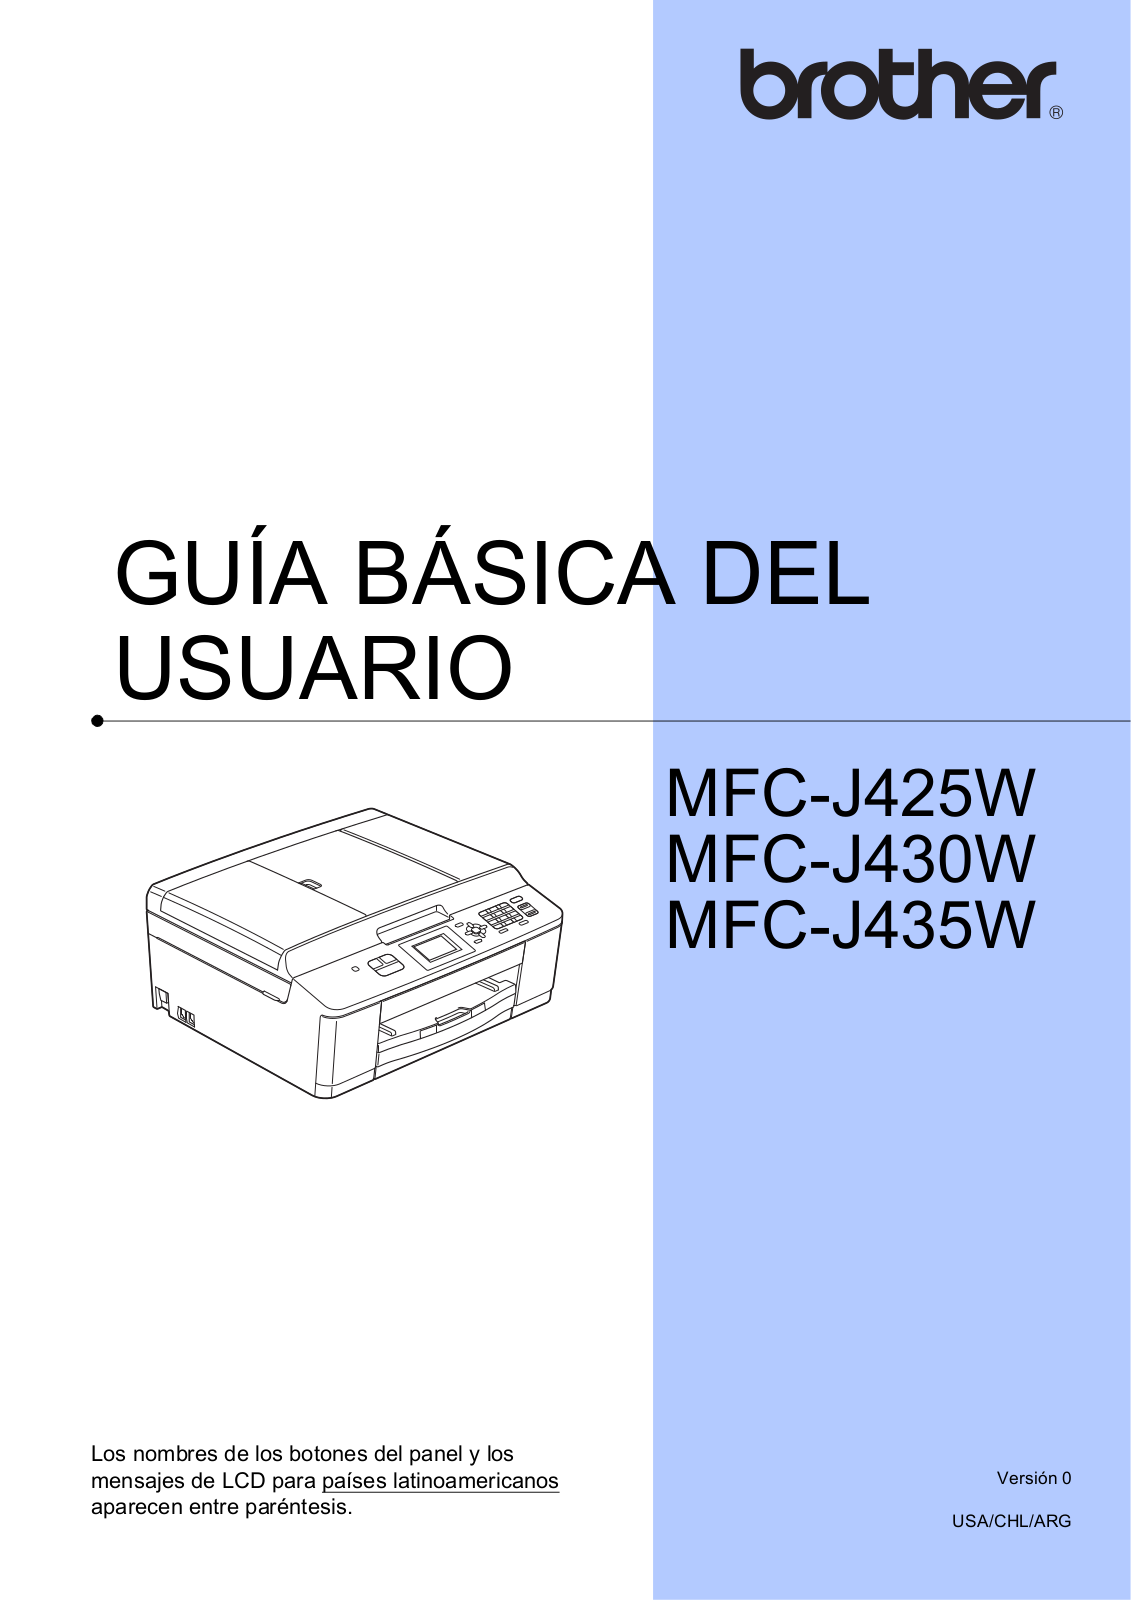 Brother MFC-J425W, MFC-J430W, MFC-J435W User Guide